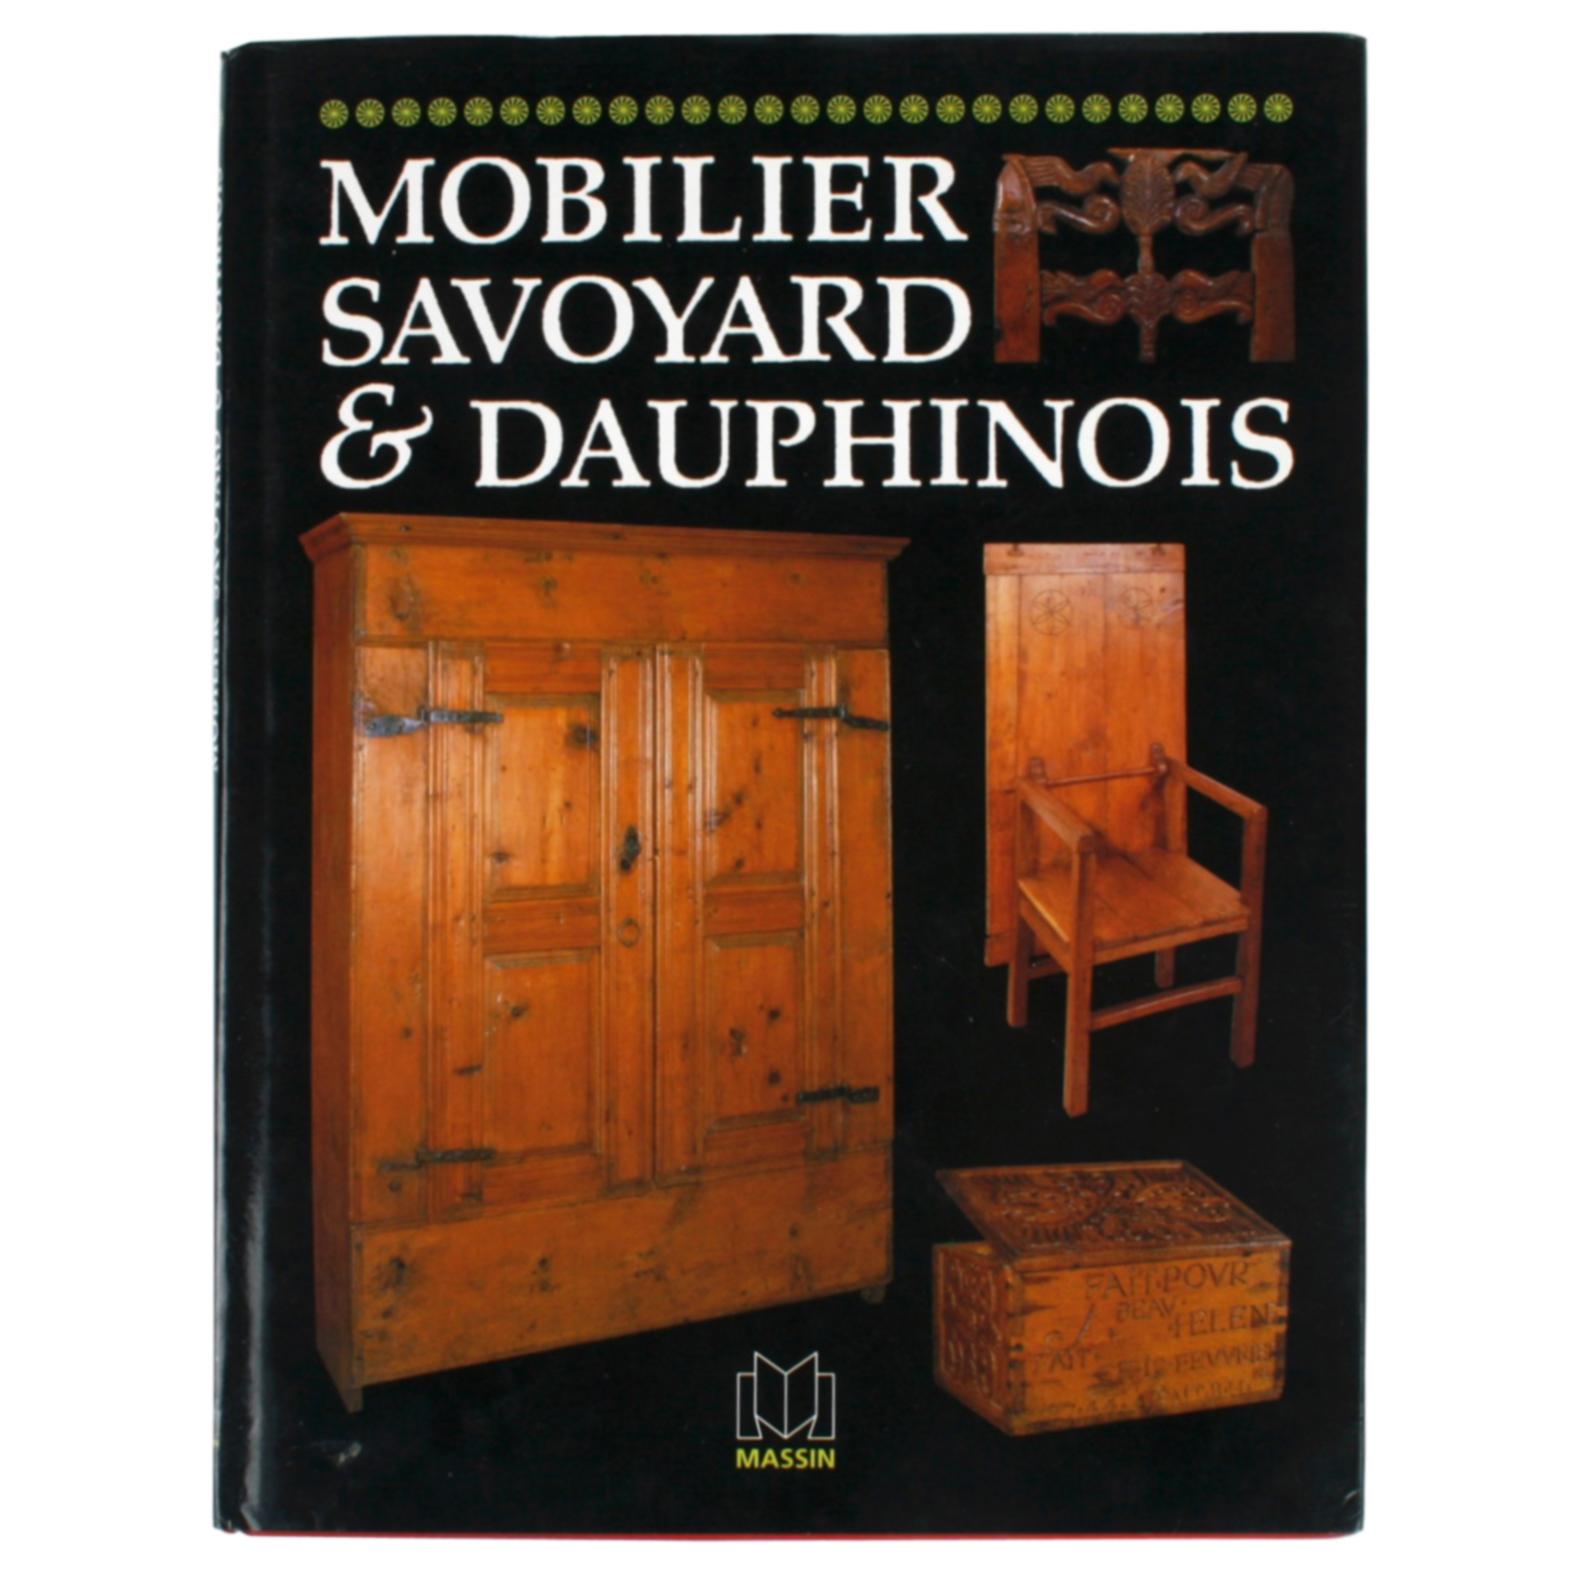 Mobilier Savoyard & Dauphinois by Edith Mannoni, 1st Edition